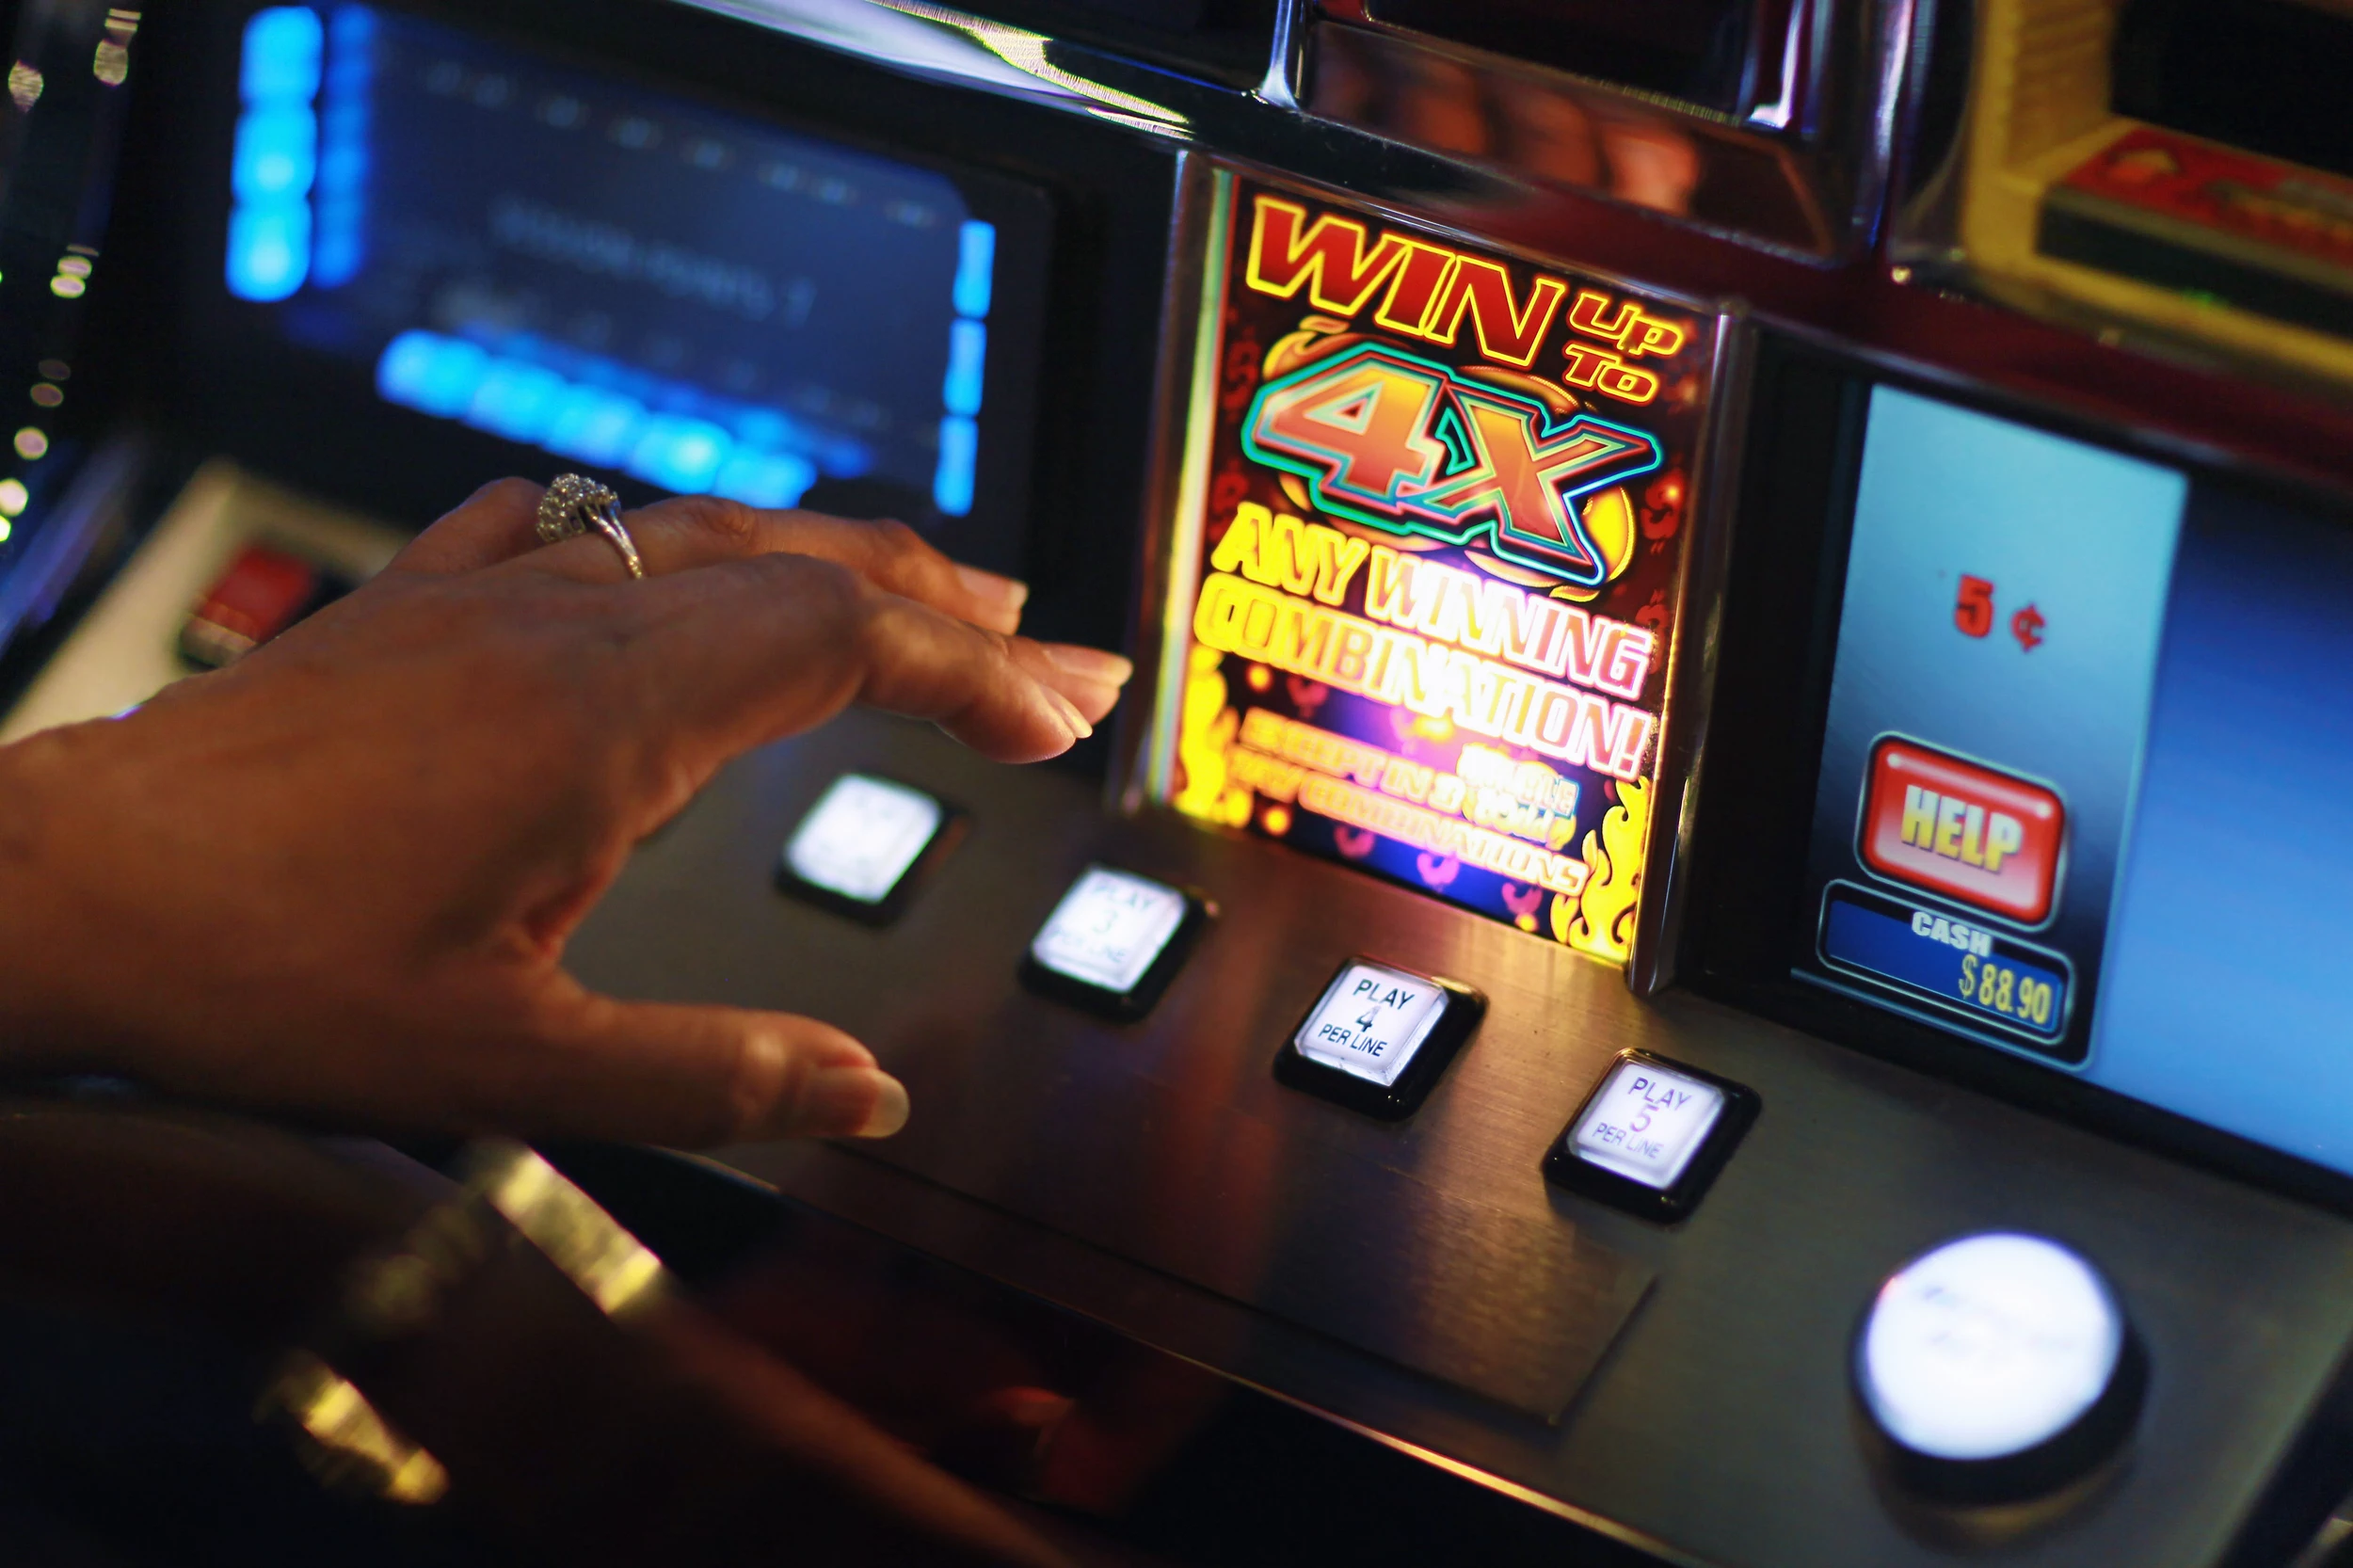 What Slot Machines Should You Play - Big changes coming to Turning